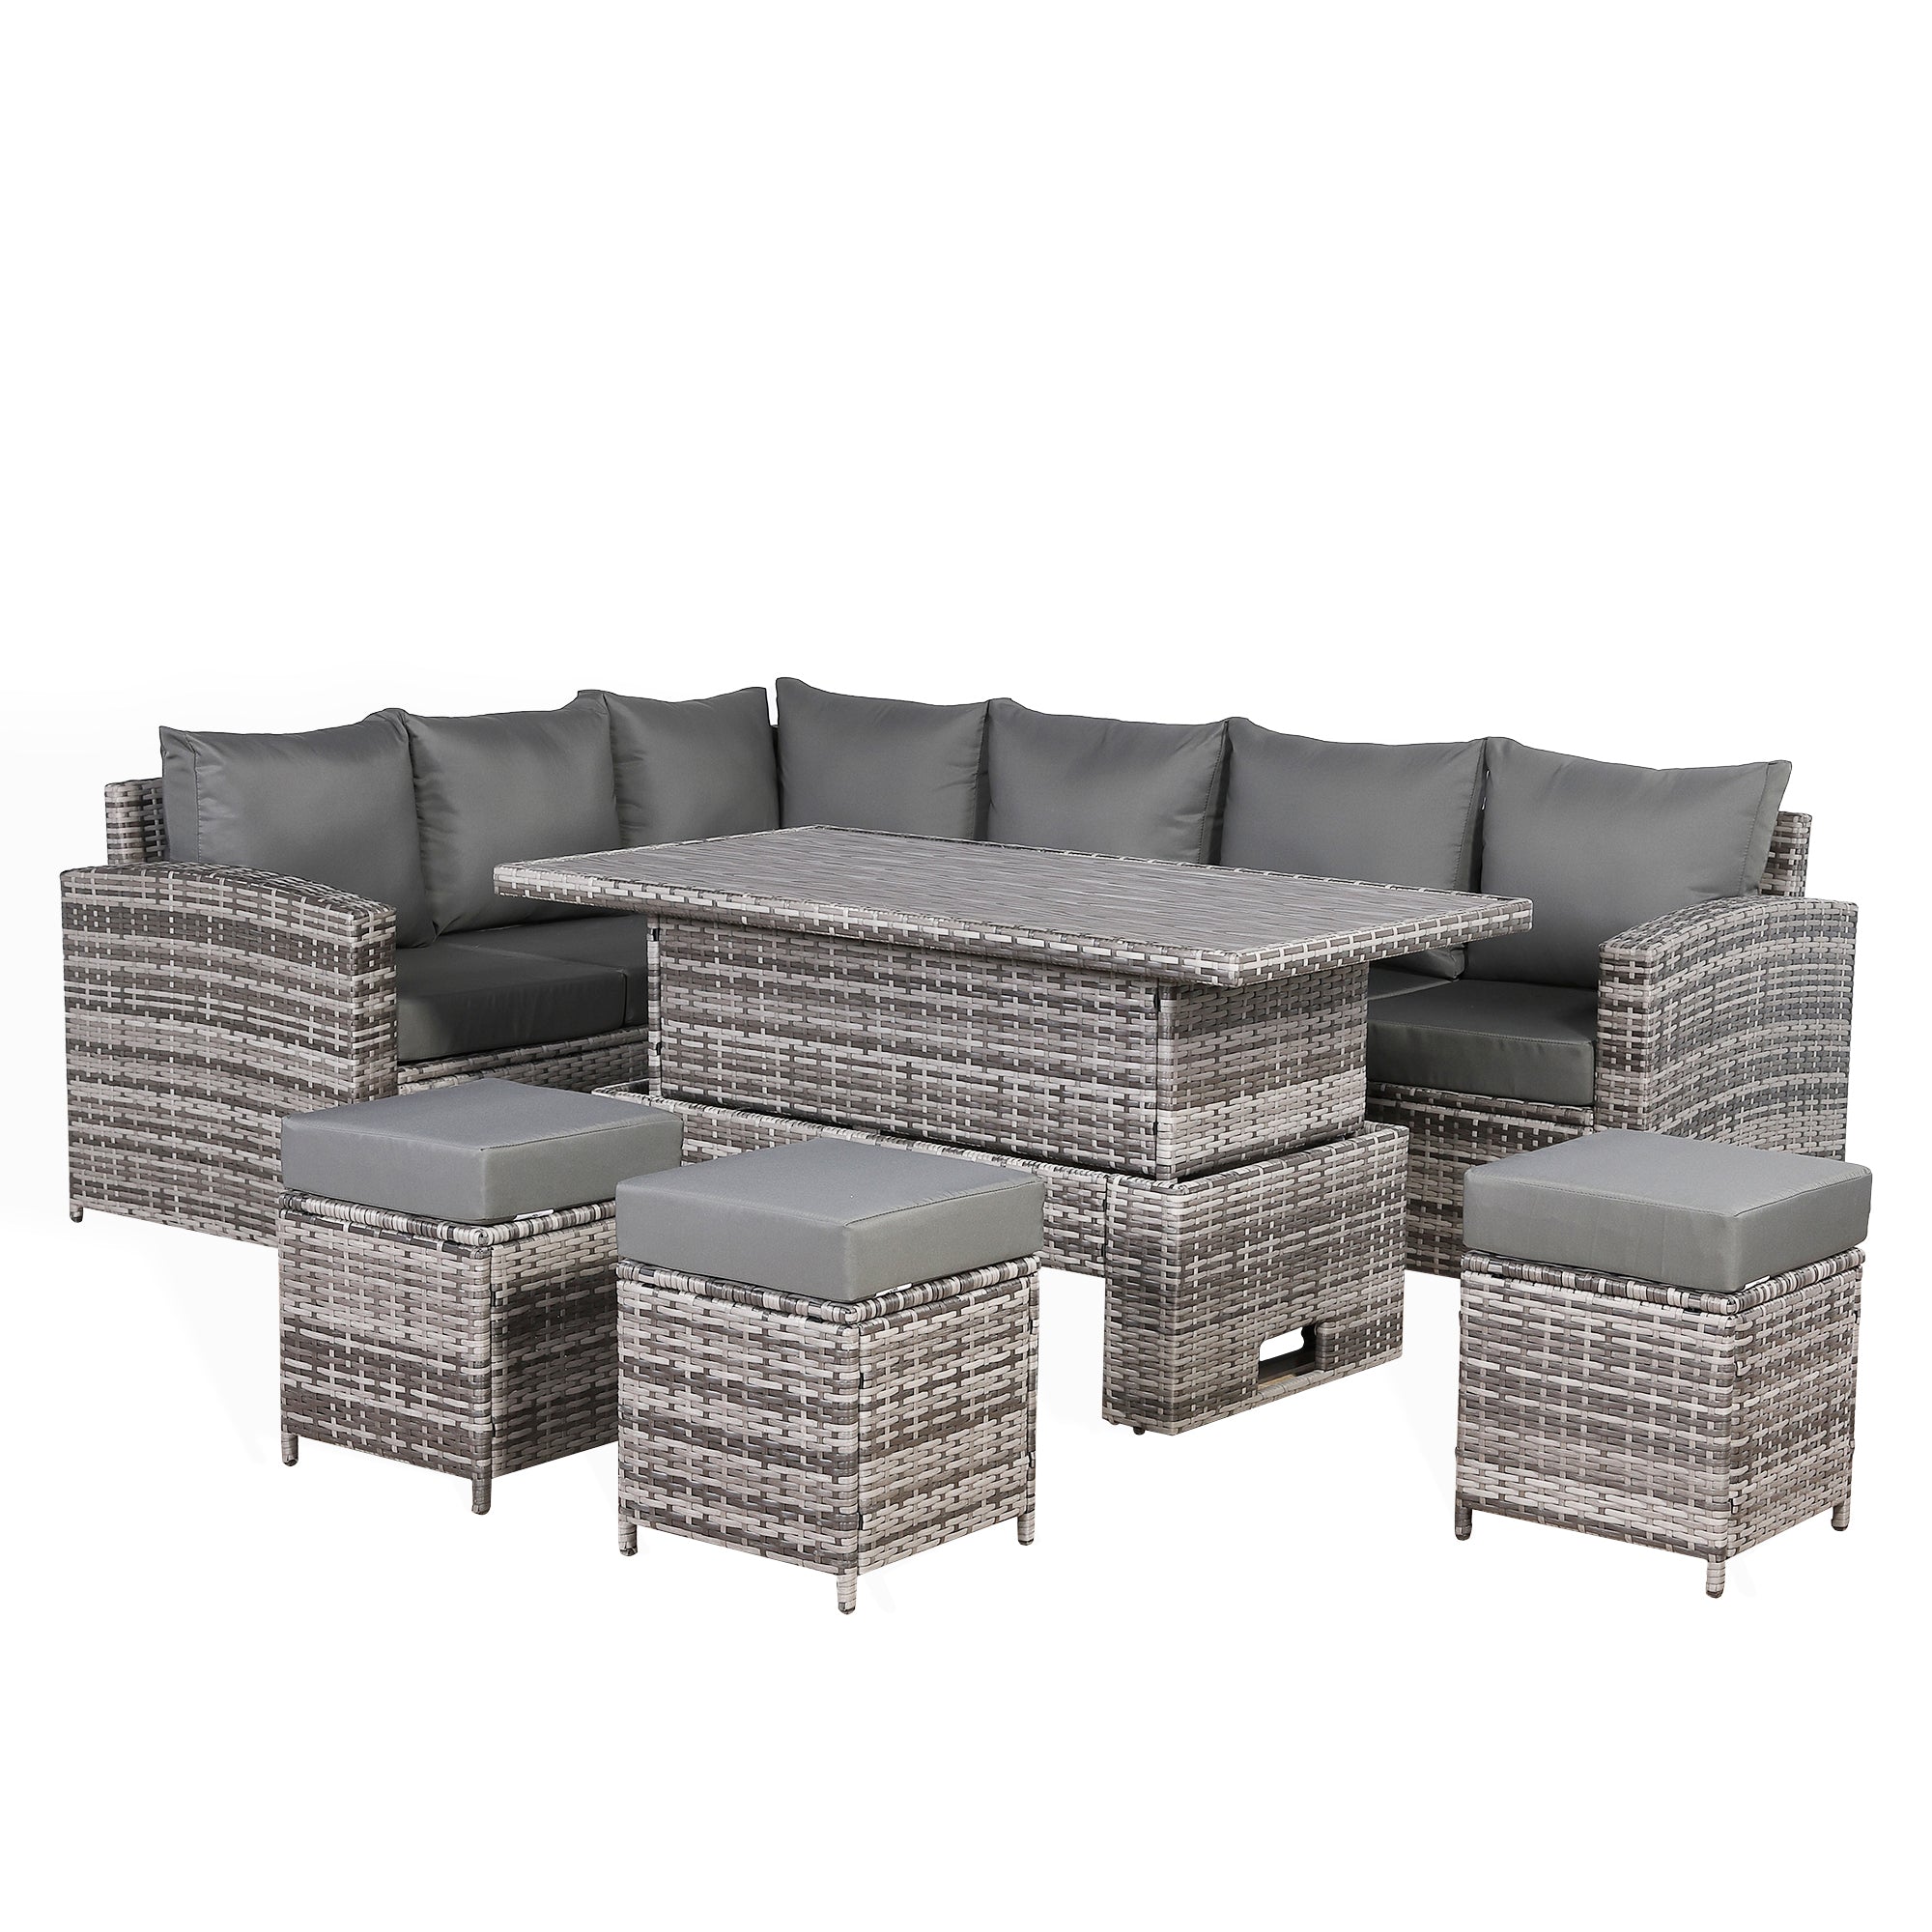 Henley Range High Back LHF Dining Corner Sofa Set in Grey Weave with Rising Table